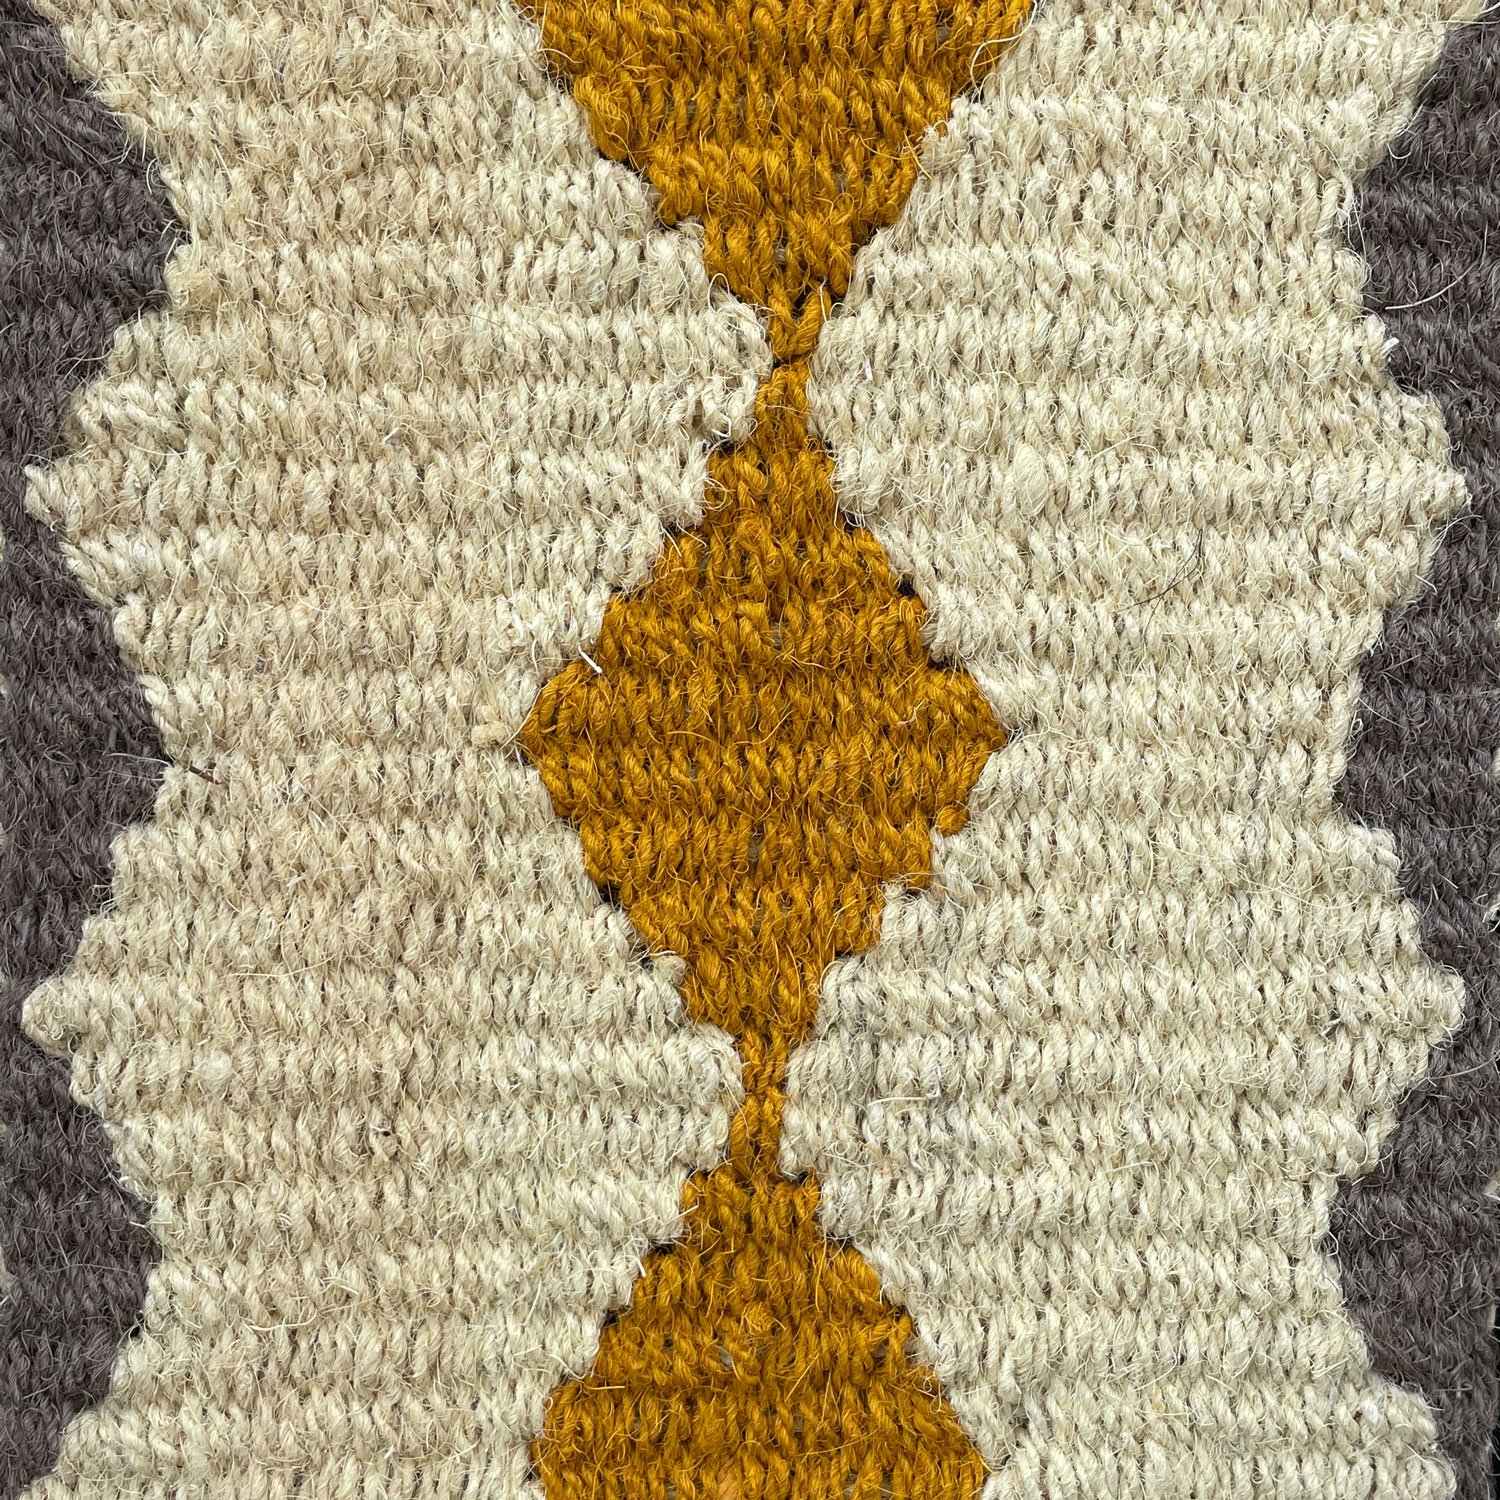 Patterned woven welcome mats